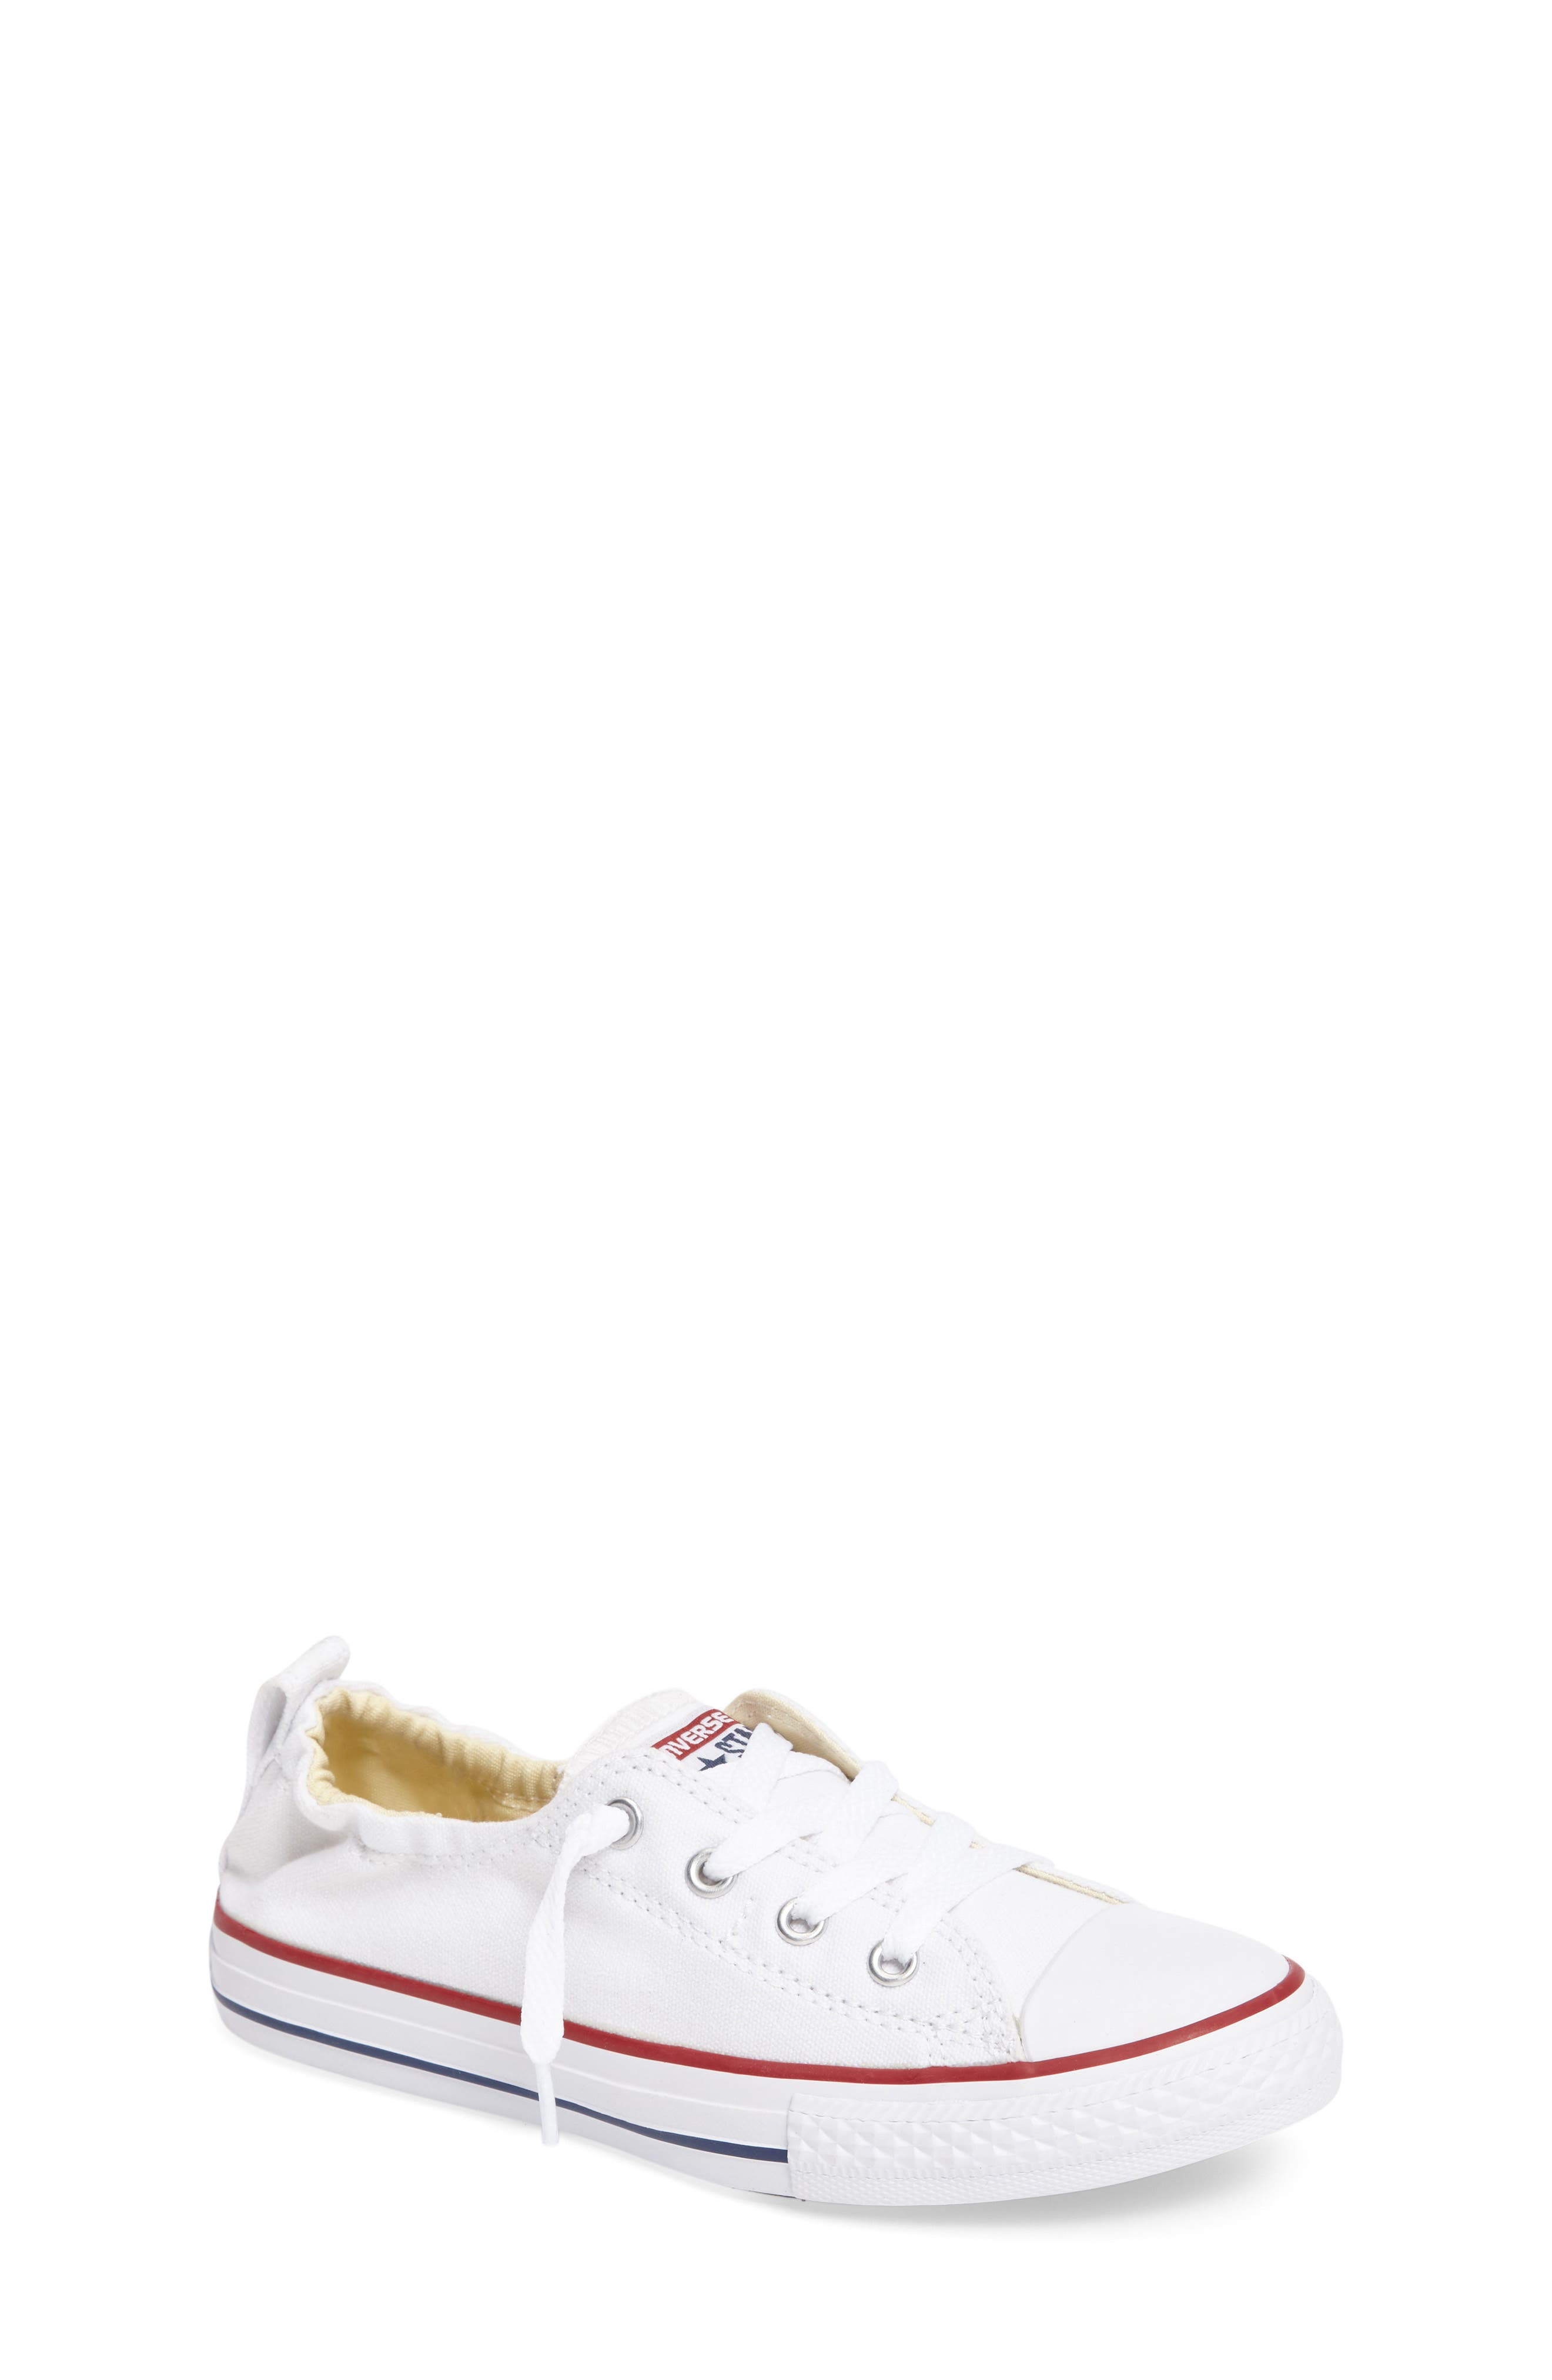 Converse Kids' Chuck Taylor In White